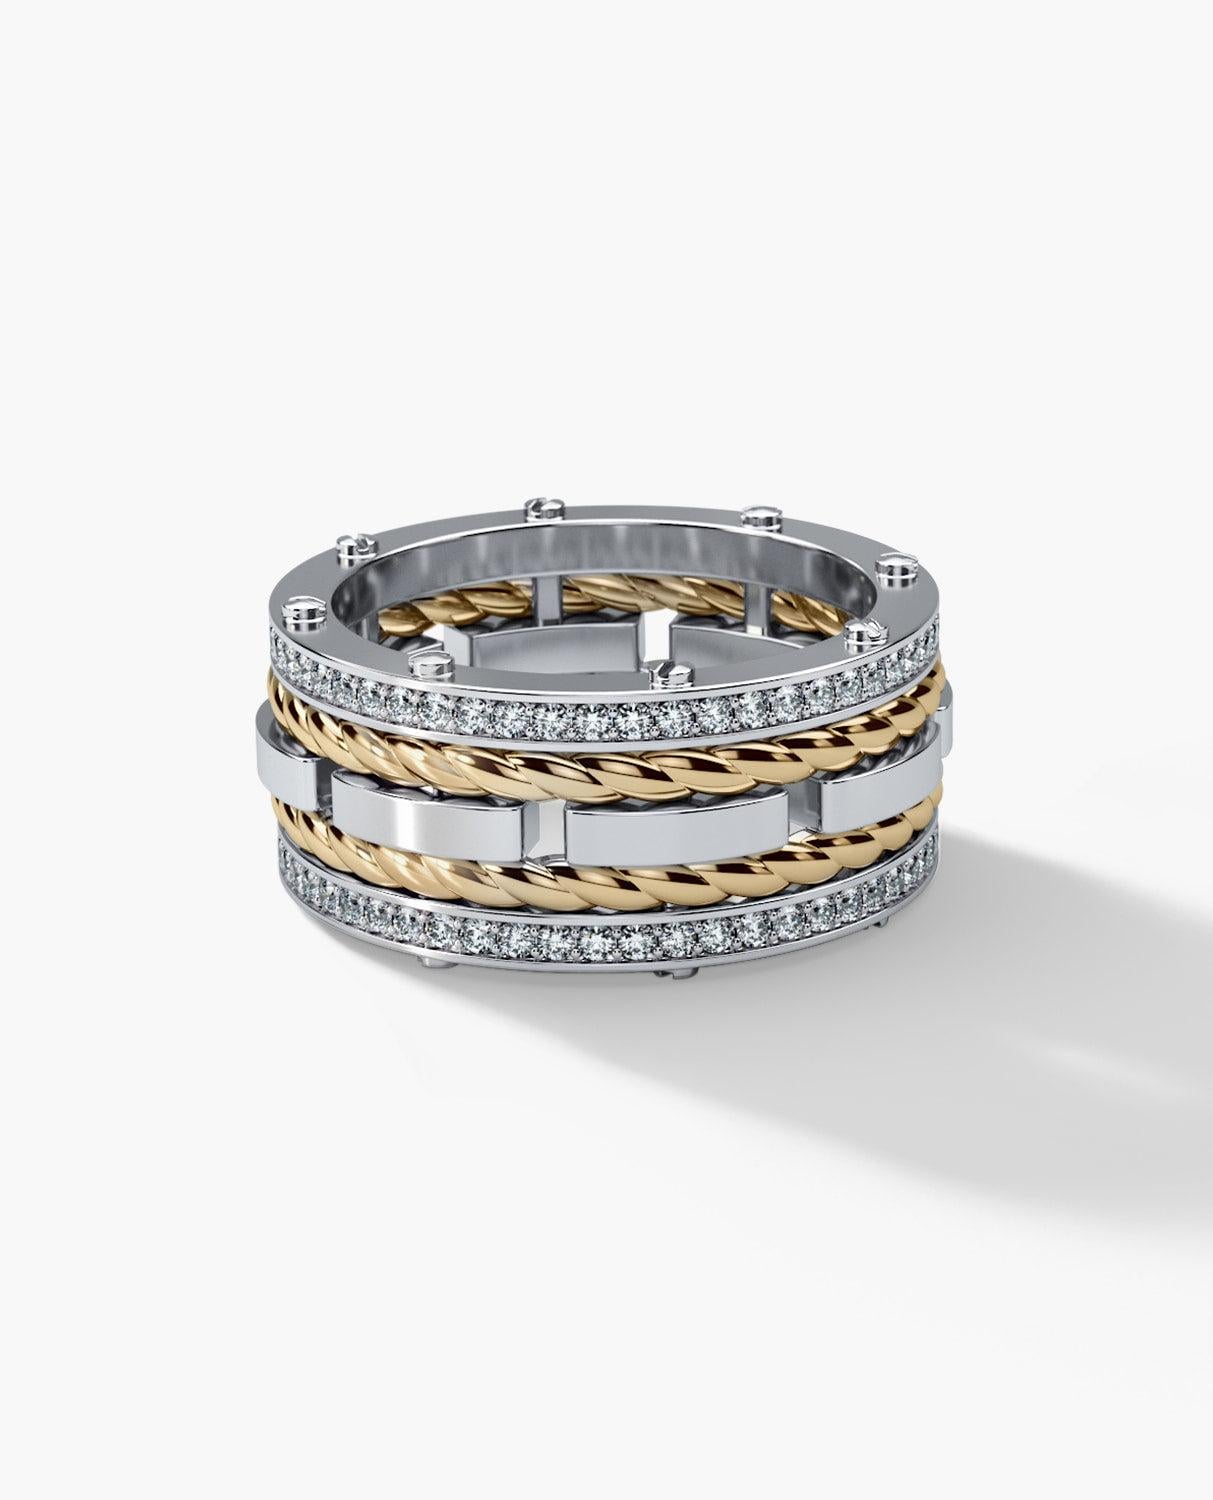 Contemporary ROPES Two-Tone 14k White & Yellow Gold Ring with 1.05ct Diamonds For Sale